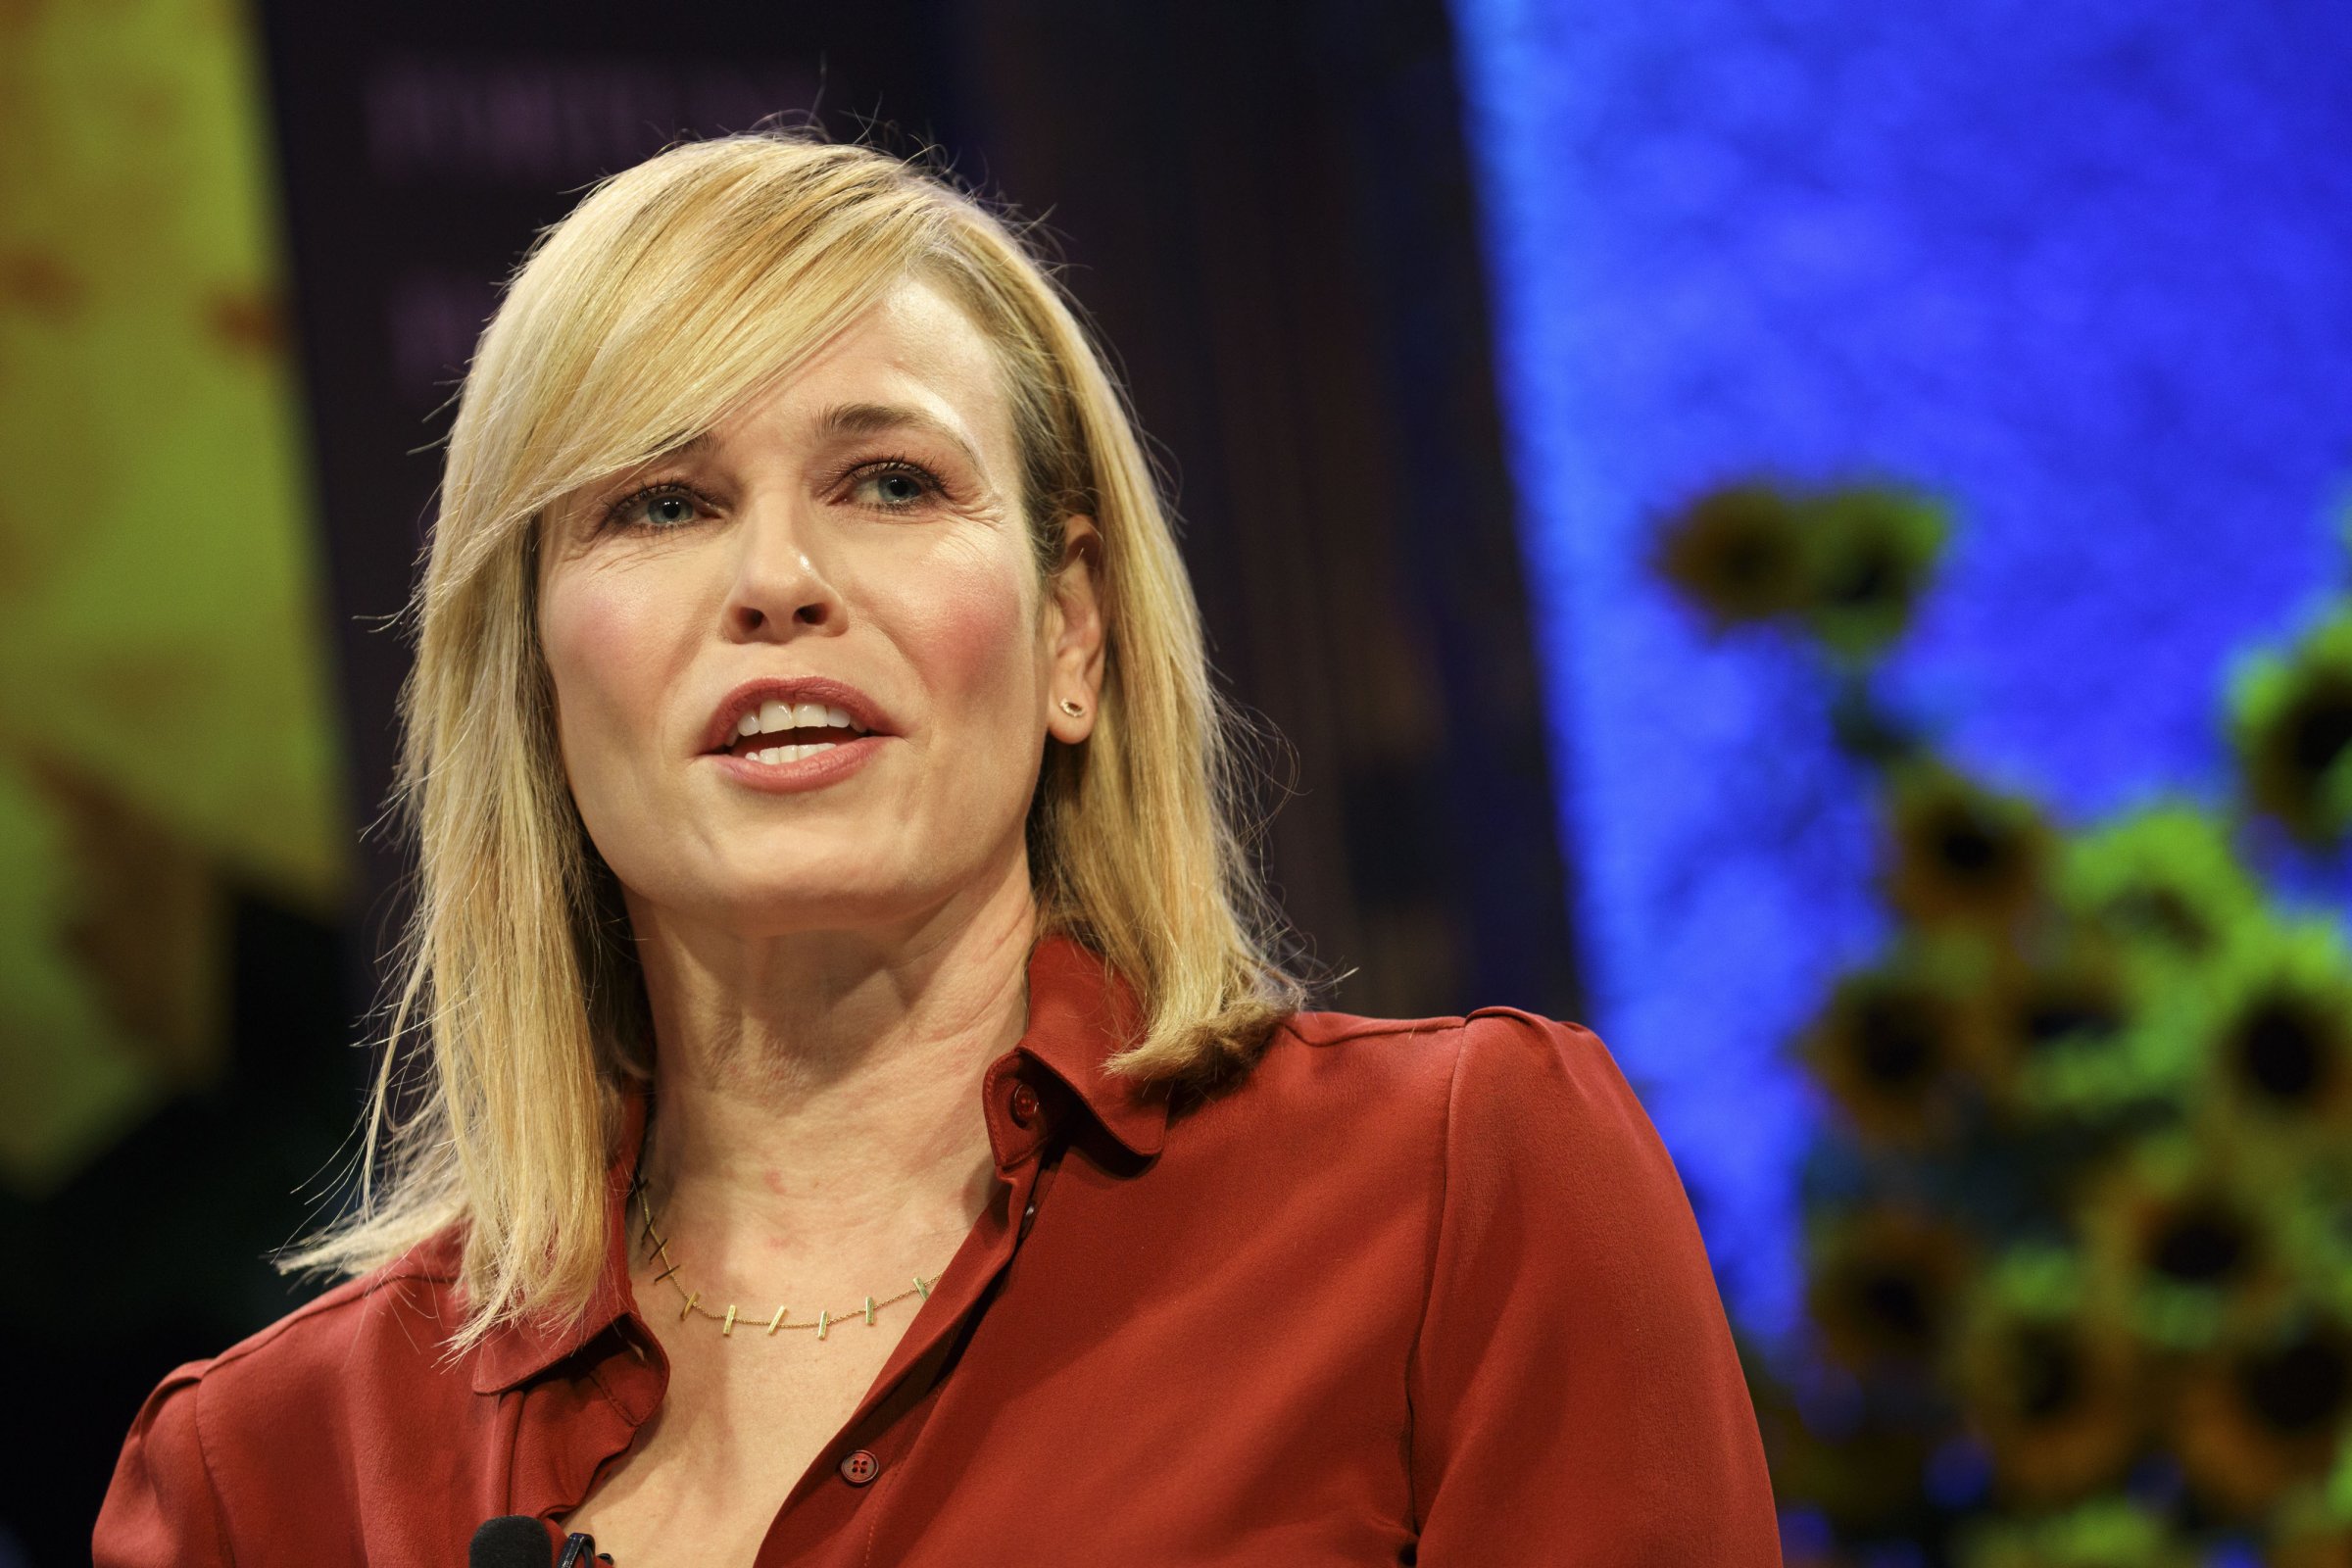 Comedian Chelsea Handler speaks during the Fortune Most Powerful Women Summit in Dana Point, California, U.S., on Wednesday, Oct. 19, 2016.